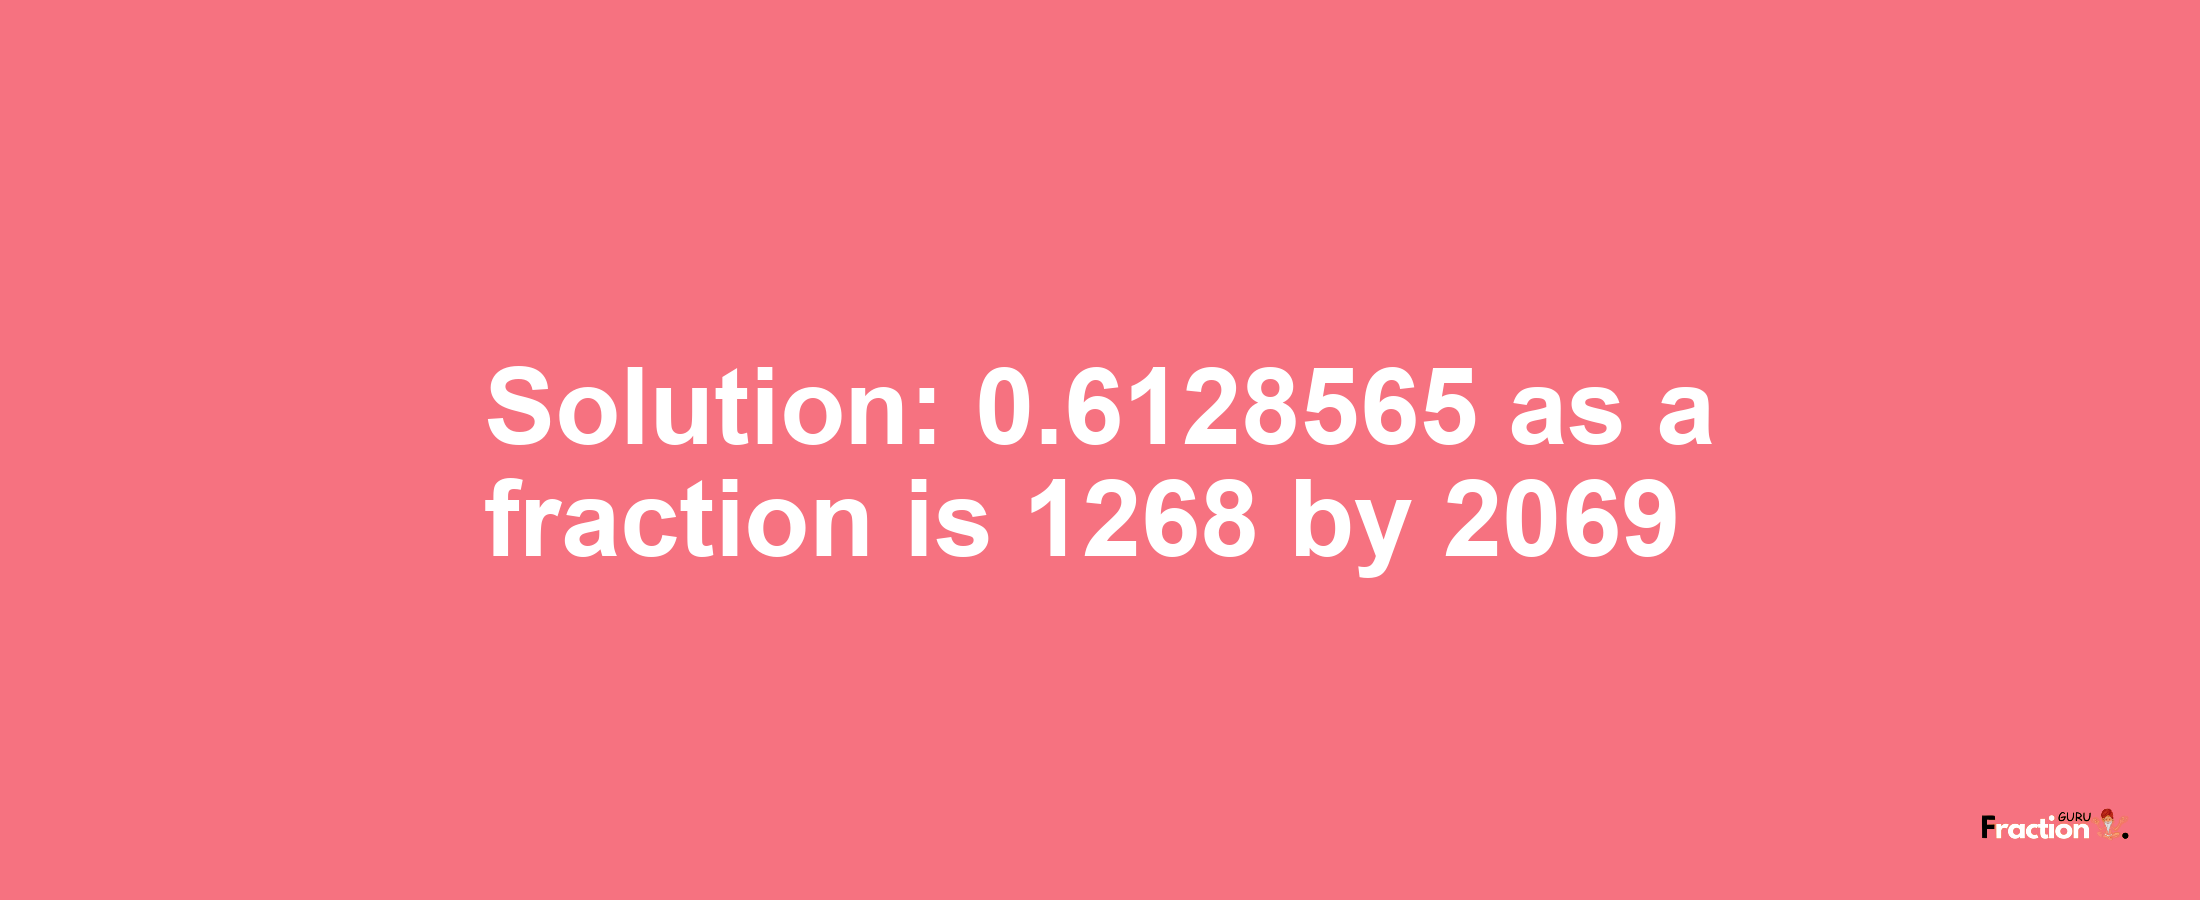 Solution:0.6128565 as a fraction is 1268/2069